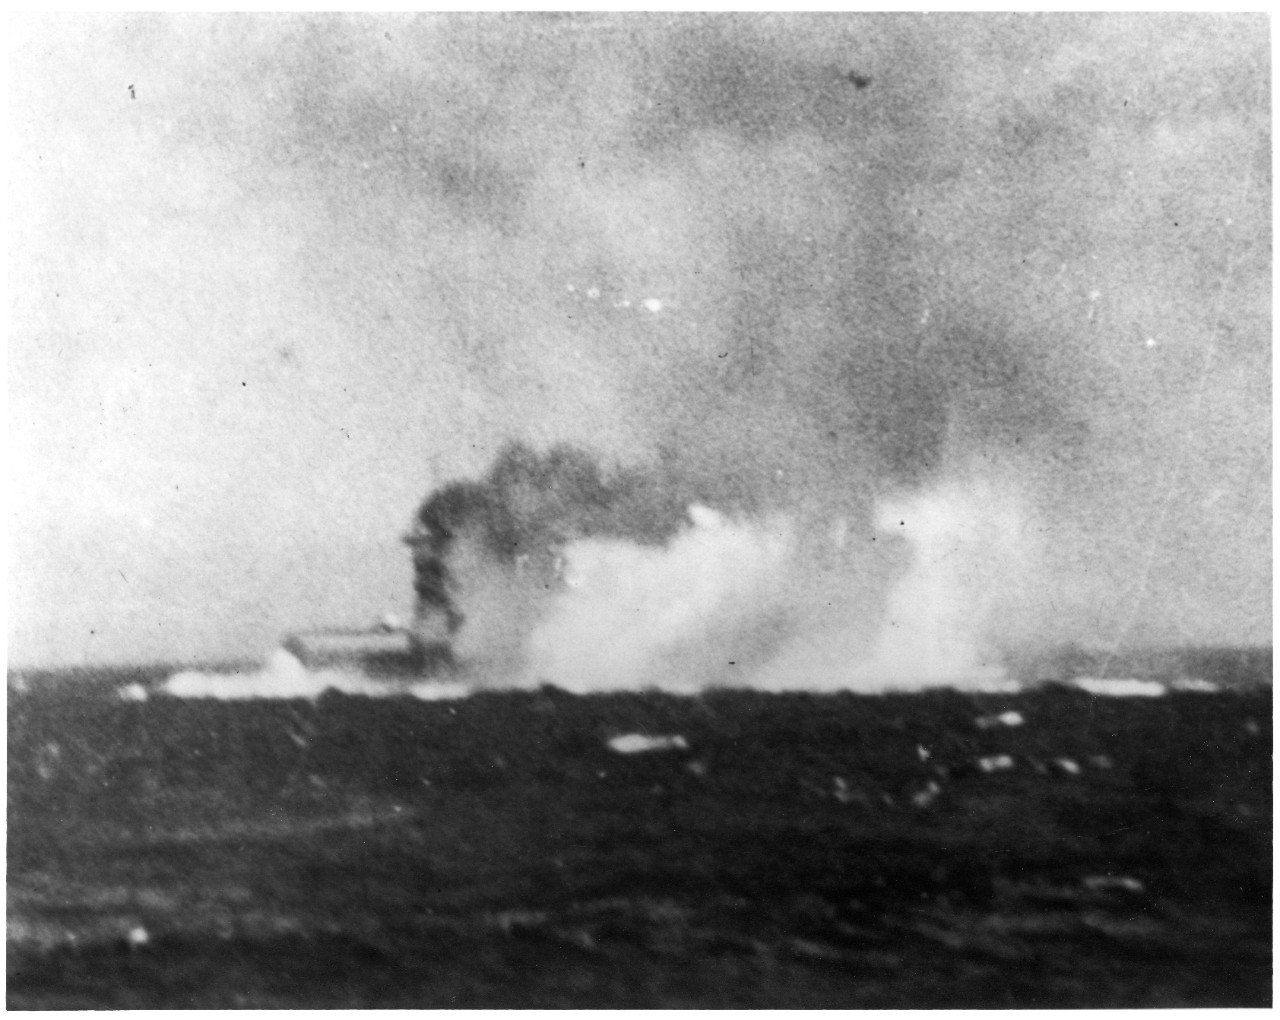 Photo #: 80-G-19100  Battle of the Coral Sea, May 1942